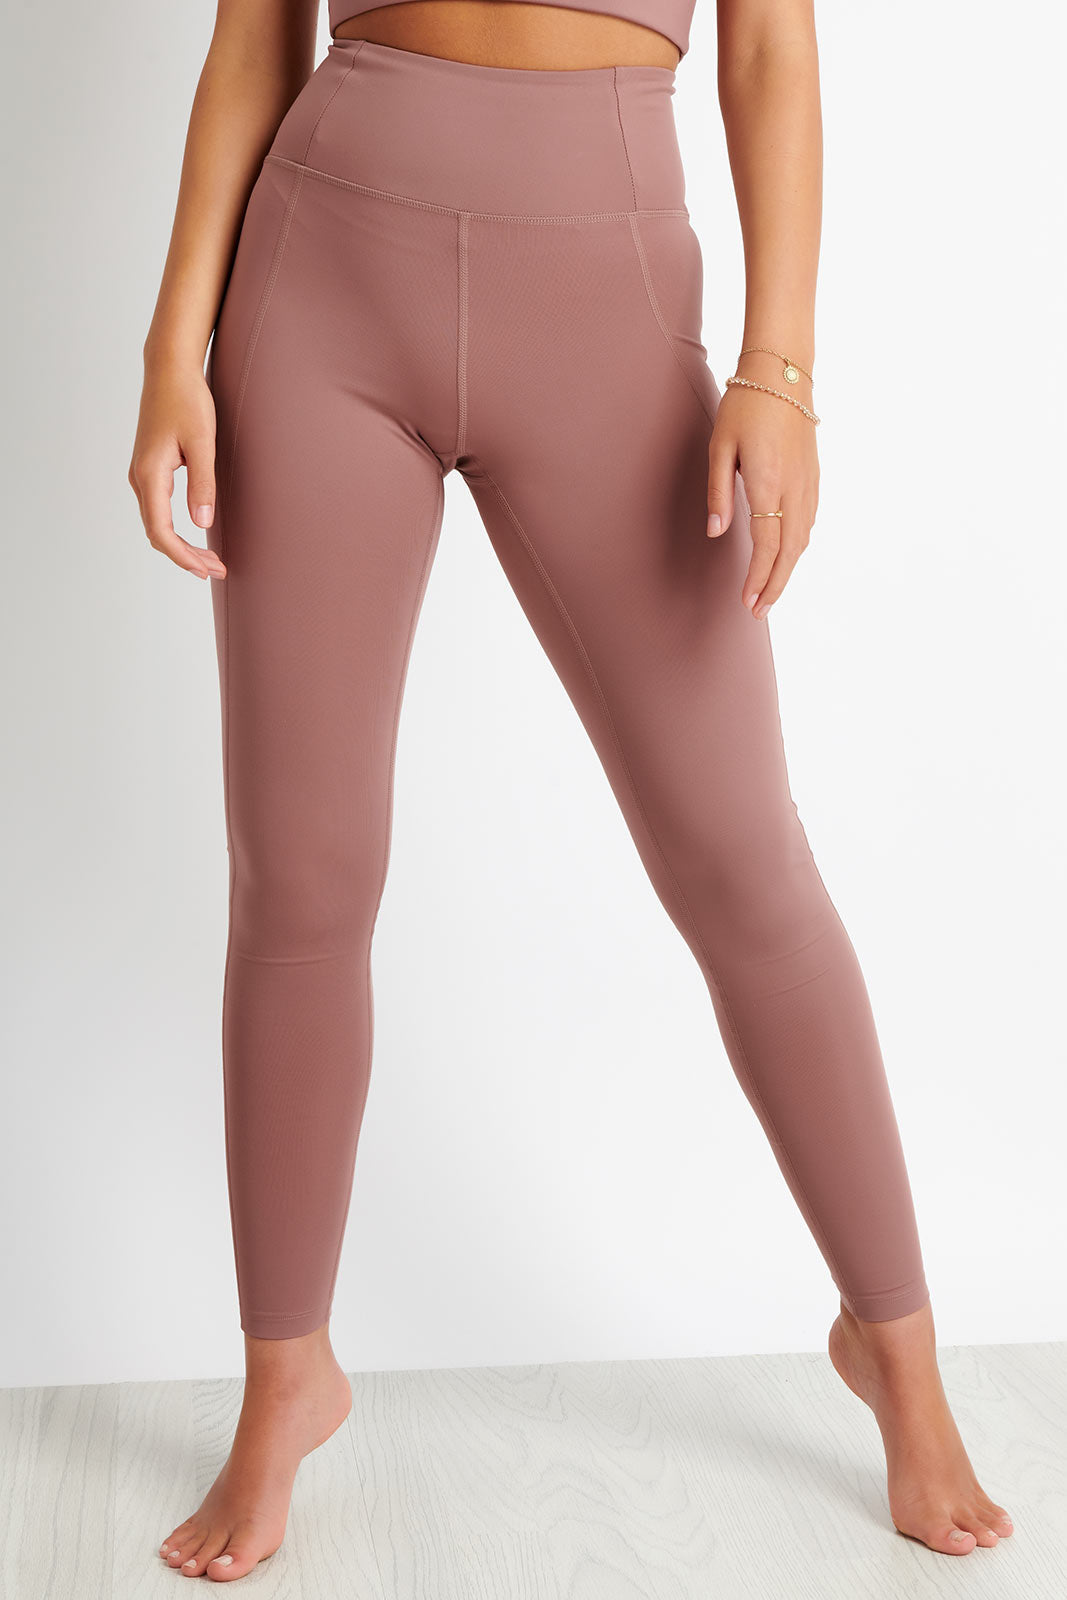 Girlfriend Collective SSENSE Exclusive Pink High-Rise Compressive Leggings